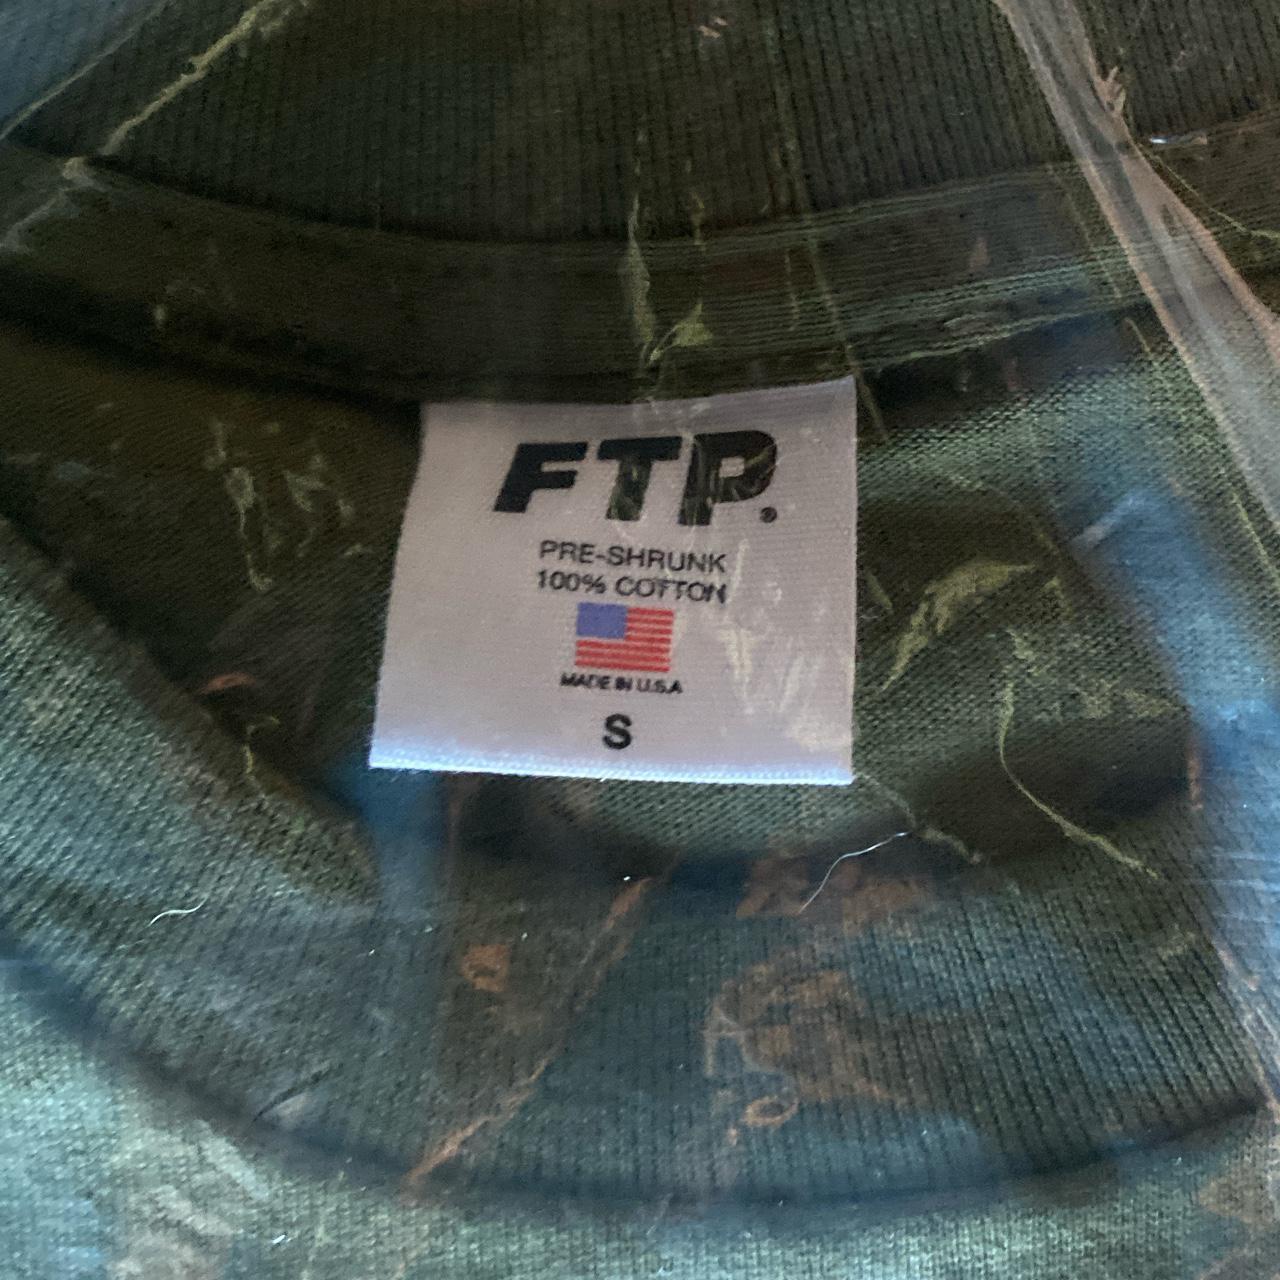 Product Image 3 - #FTP #FUCKTHEPOPULATION

REAPER TEE. OLIVE.
Size Small